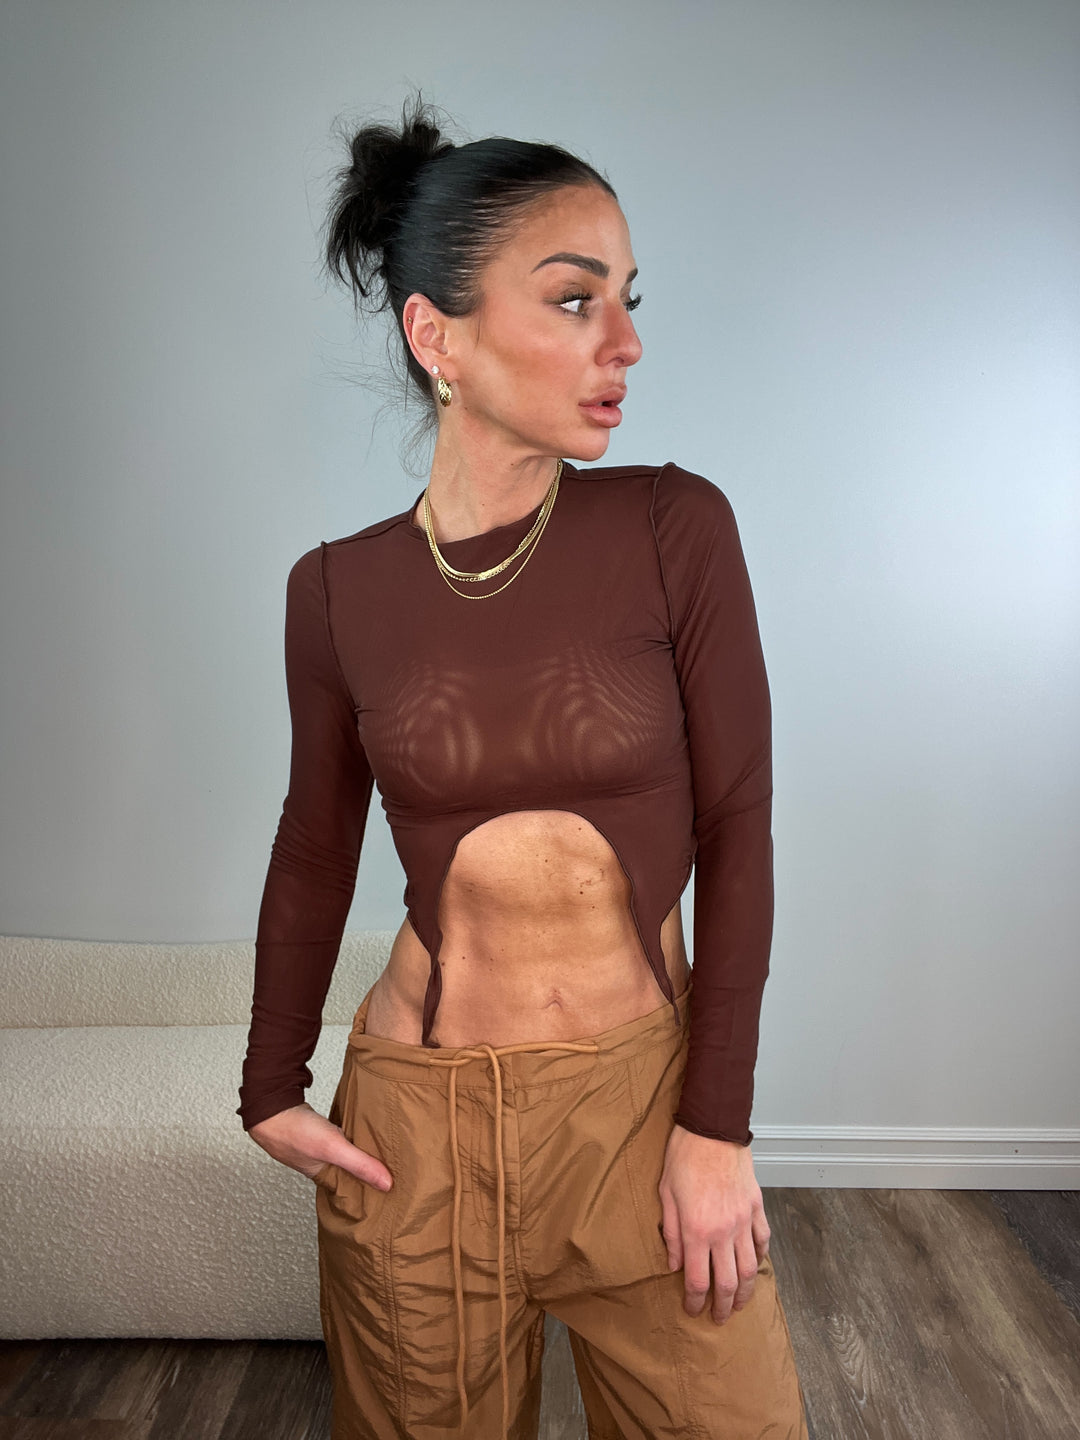 LONG SLEEVE MESH TOP WITH FRONT U CUT DETAIL. NO LINING, SEE THROUGH. CHOCOLATE BROWN COLOR 